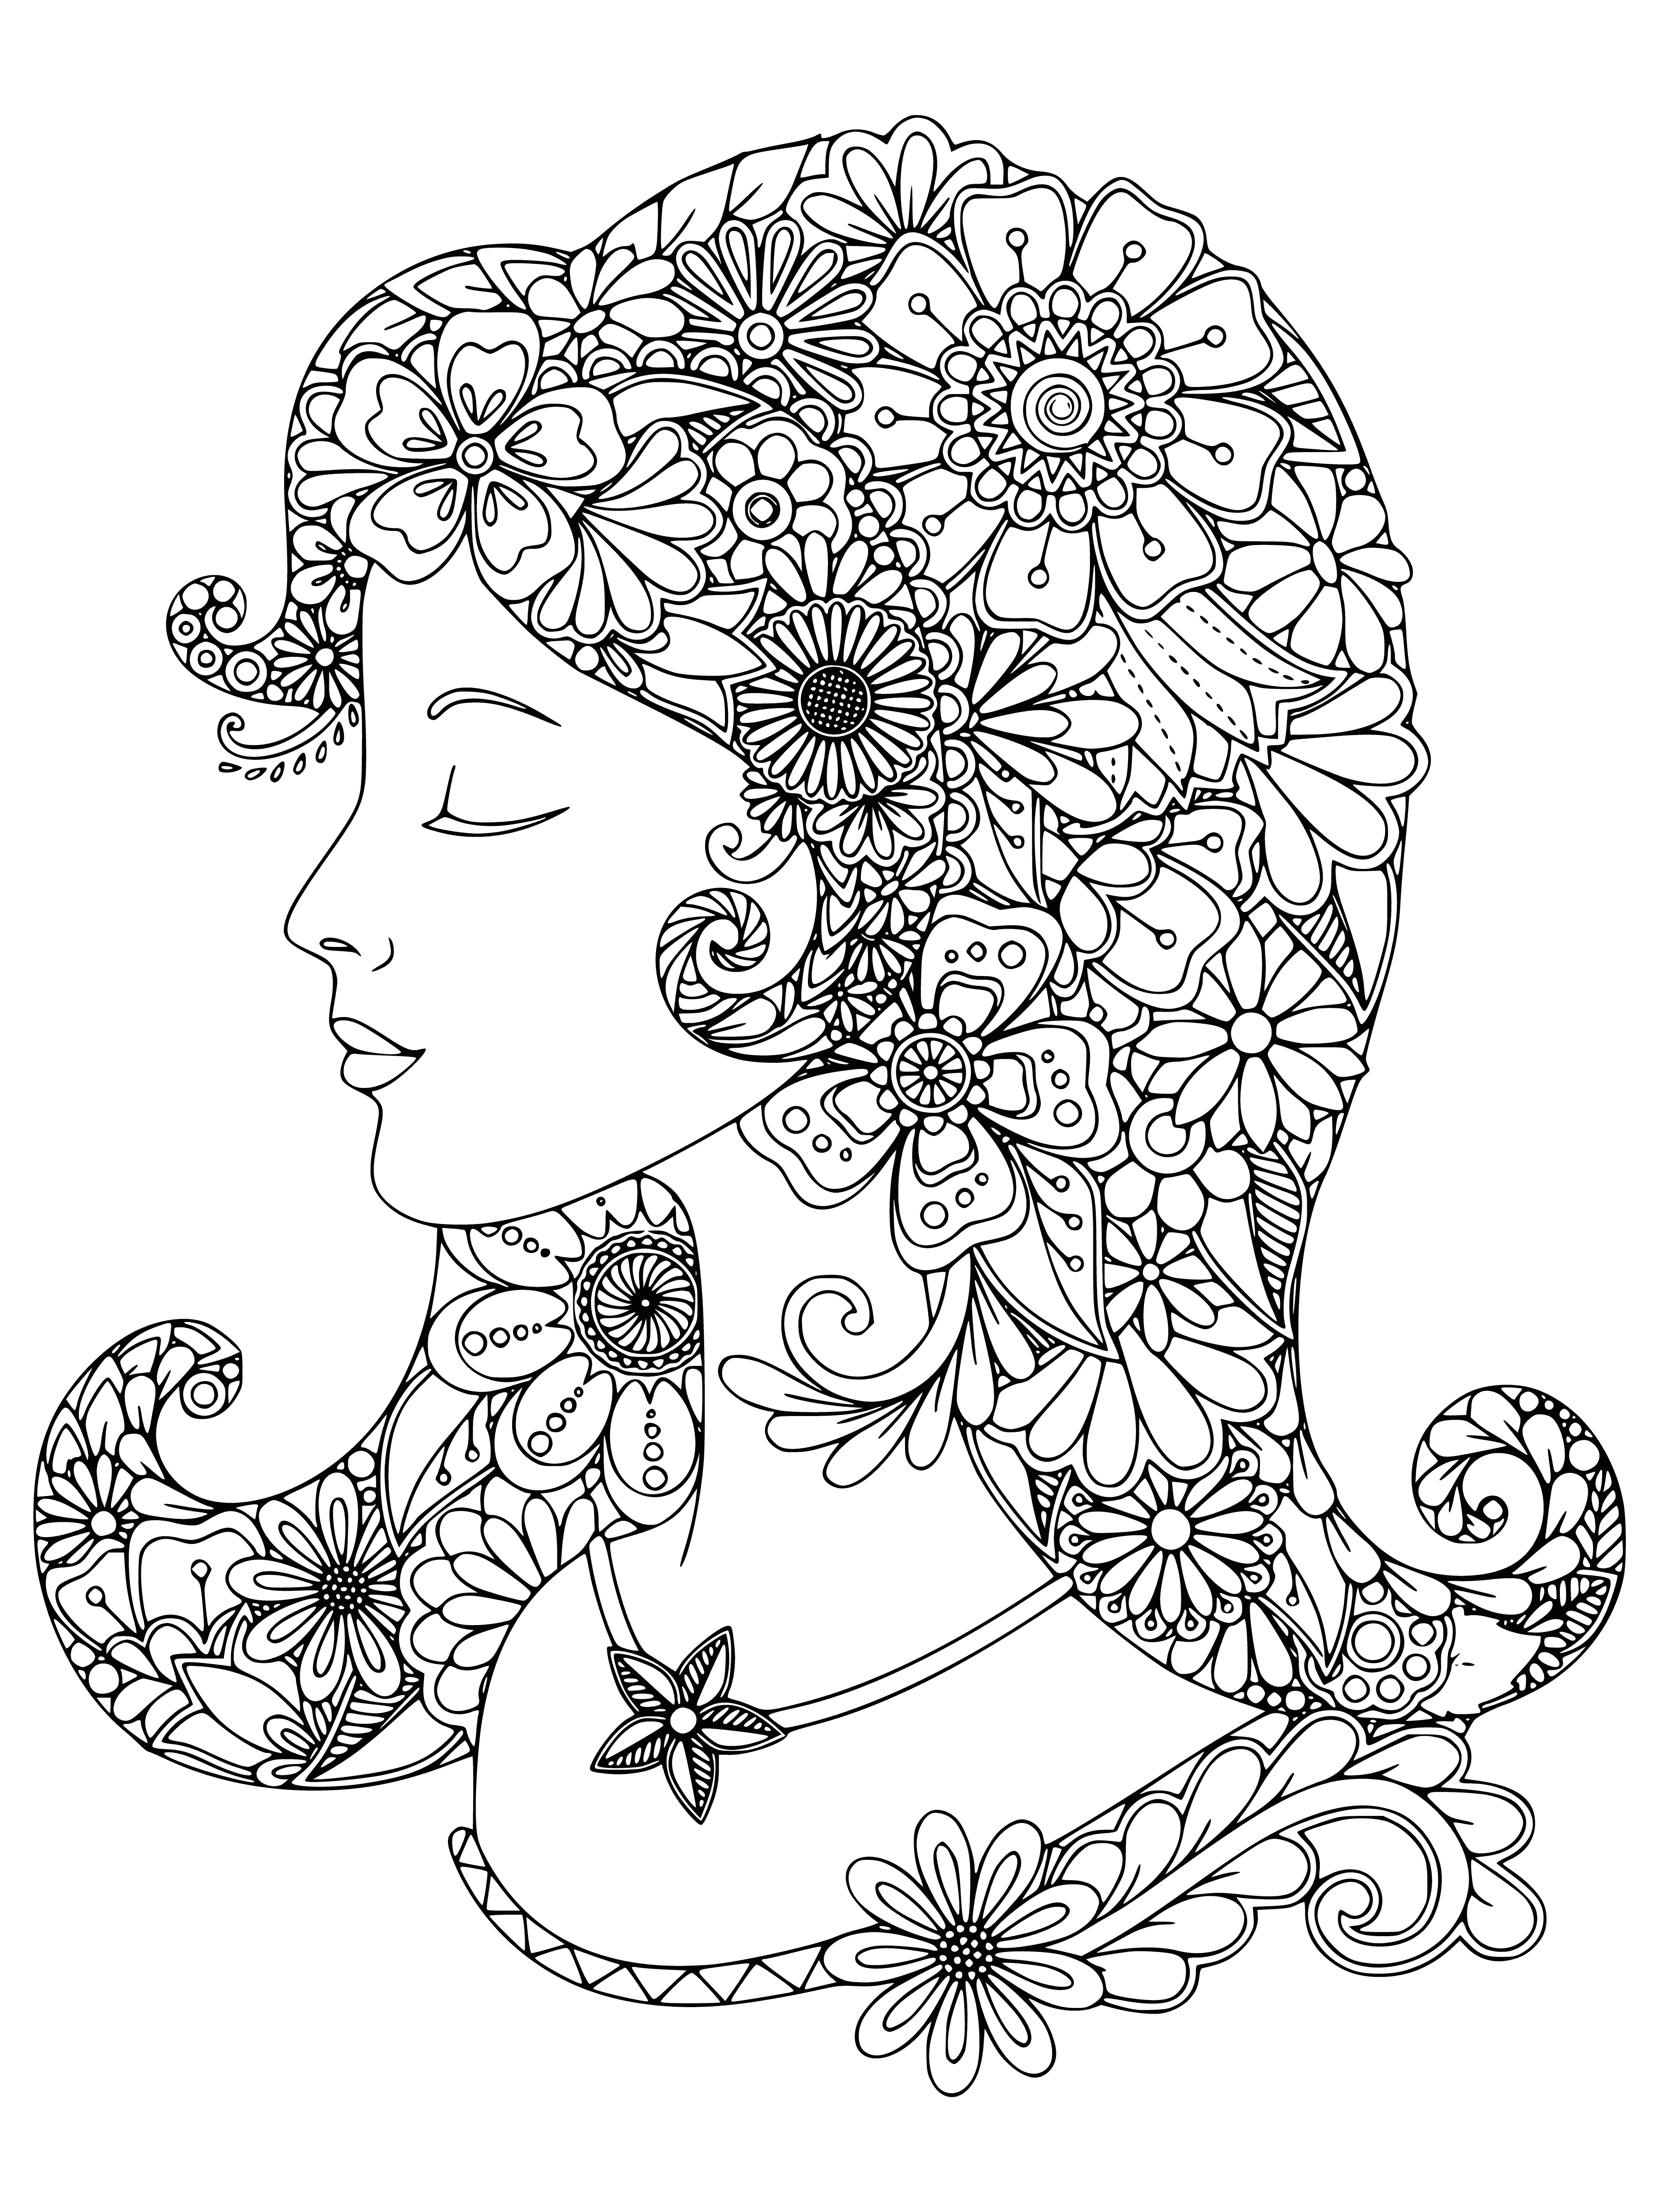 coloring page: Young woman basks in beauty of nature, hair blowing in wind, surrounded by butterflies.